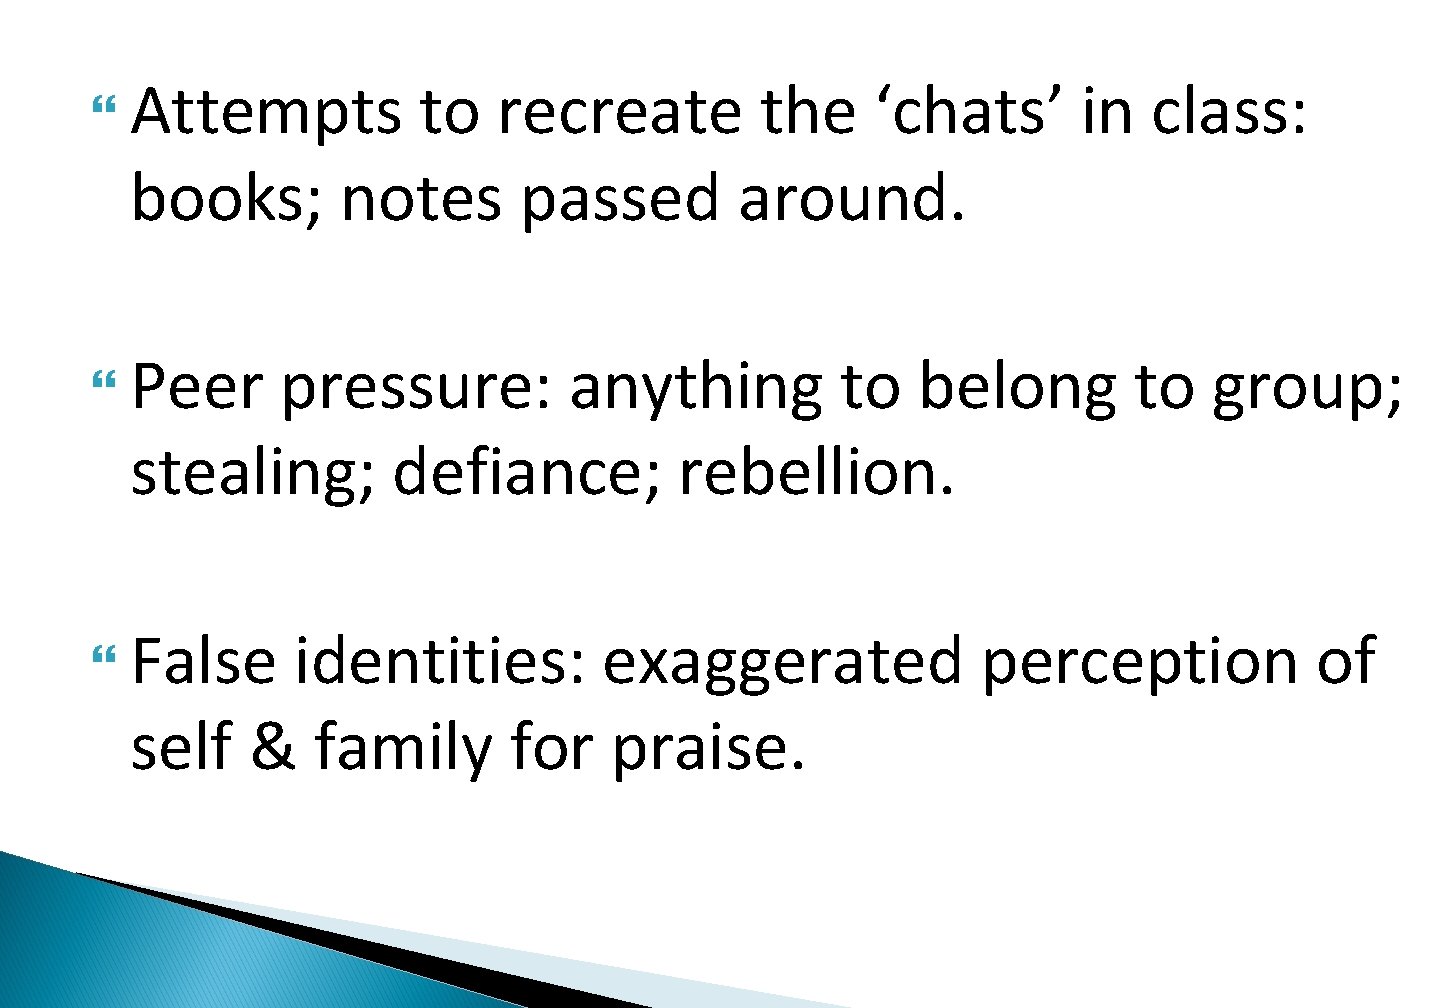  Attempts to recreate the ‘chats’ in class: books; notes passed around. Peer pressure: